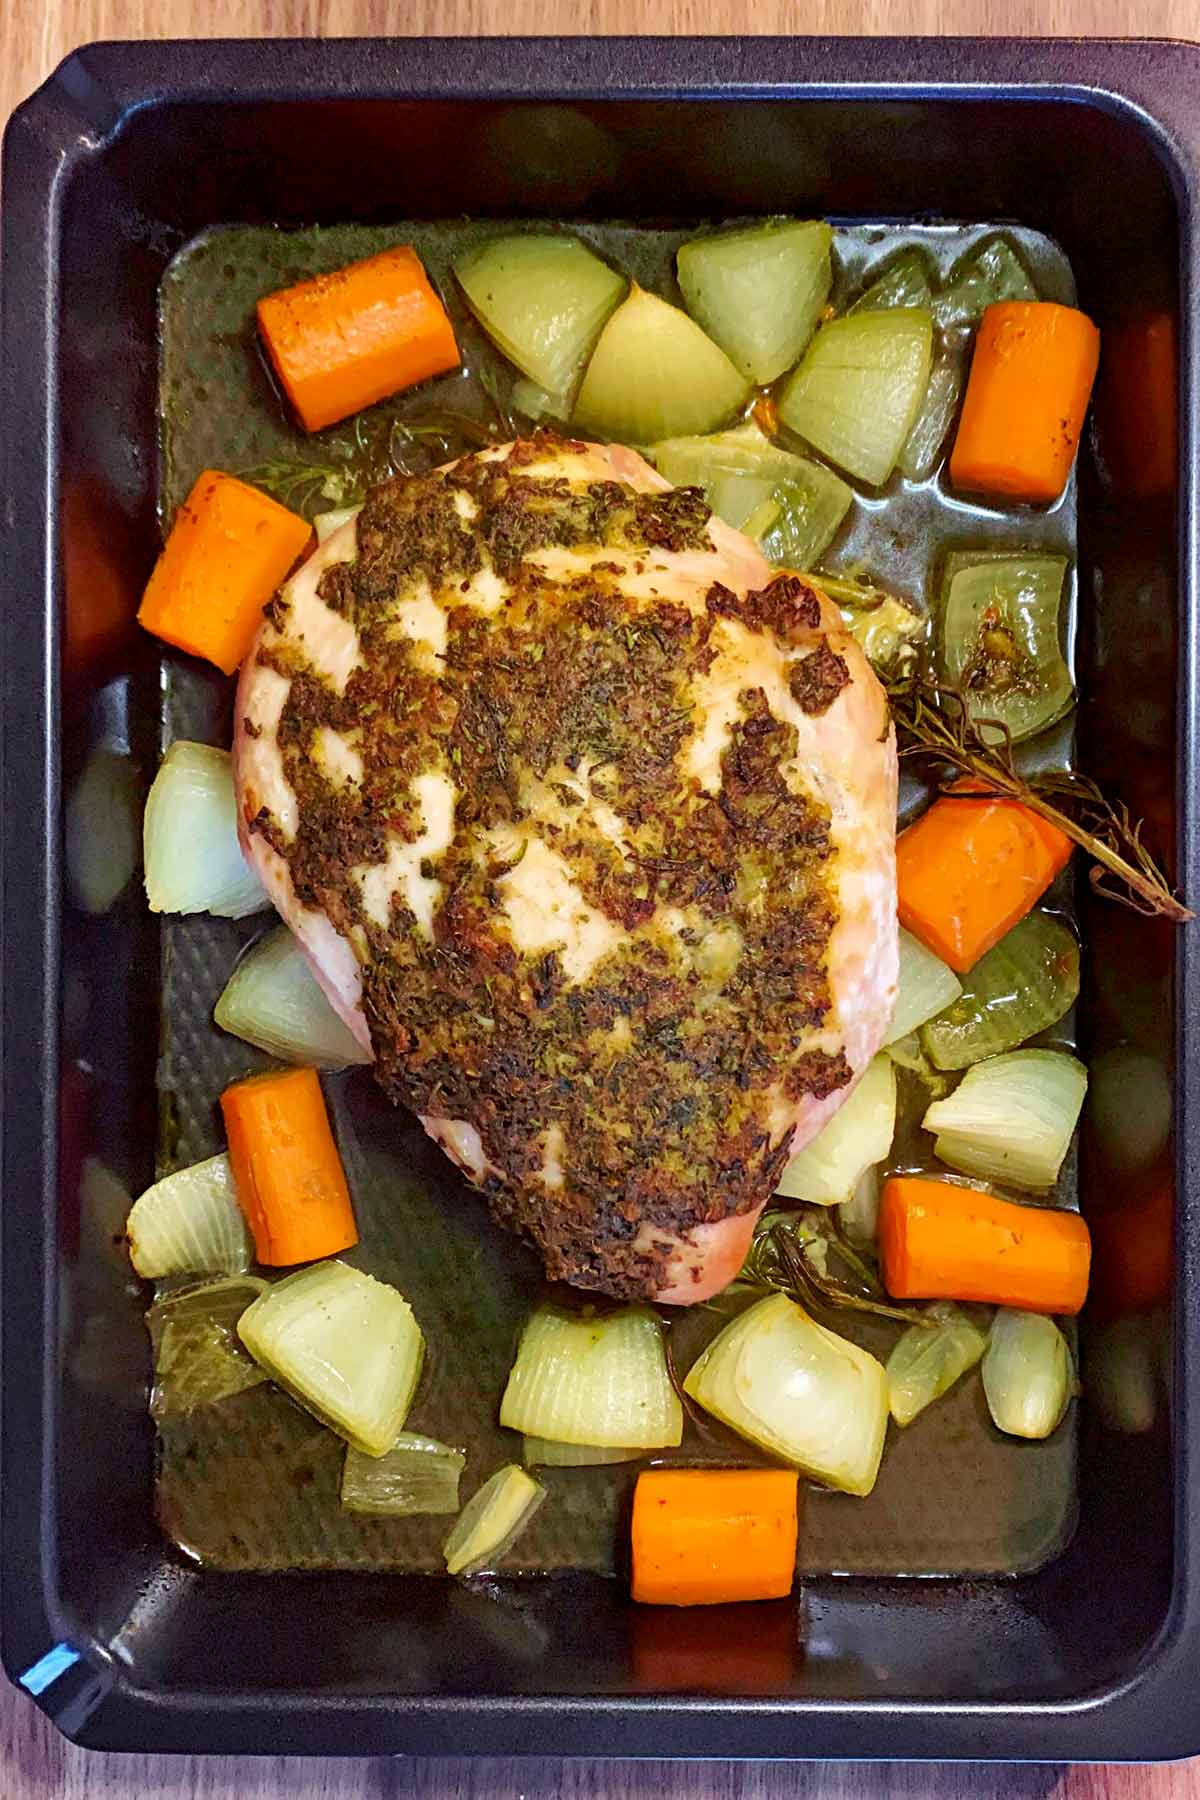 Cooked turkey breast in a baking tray with vegetables.